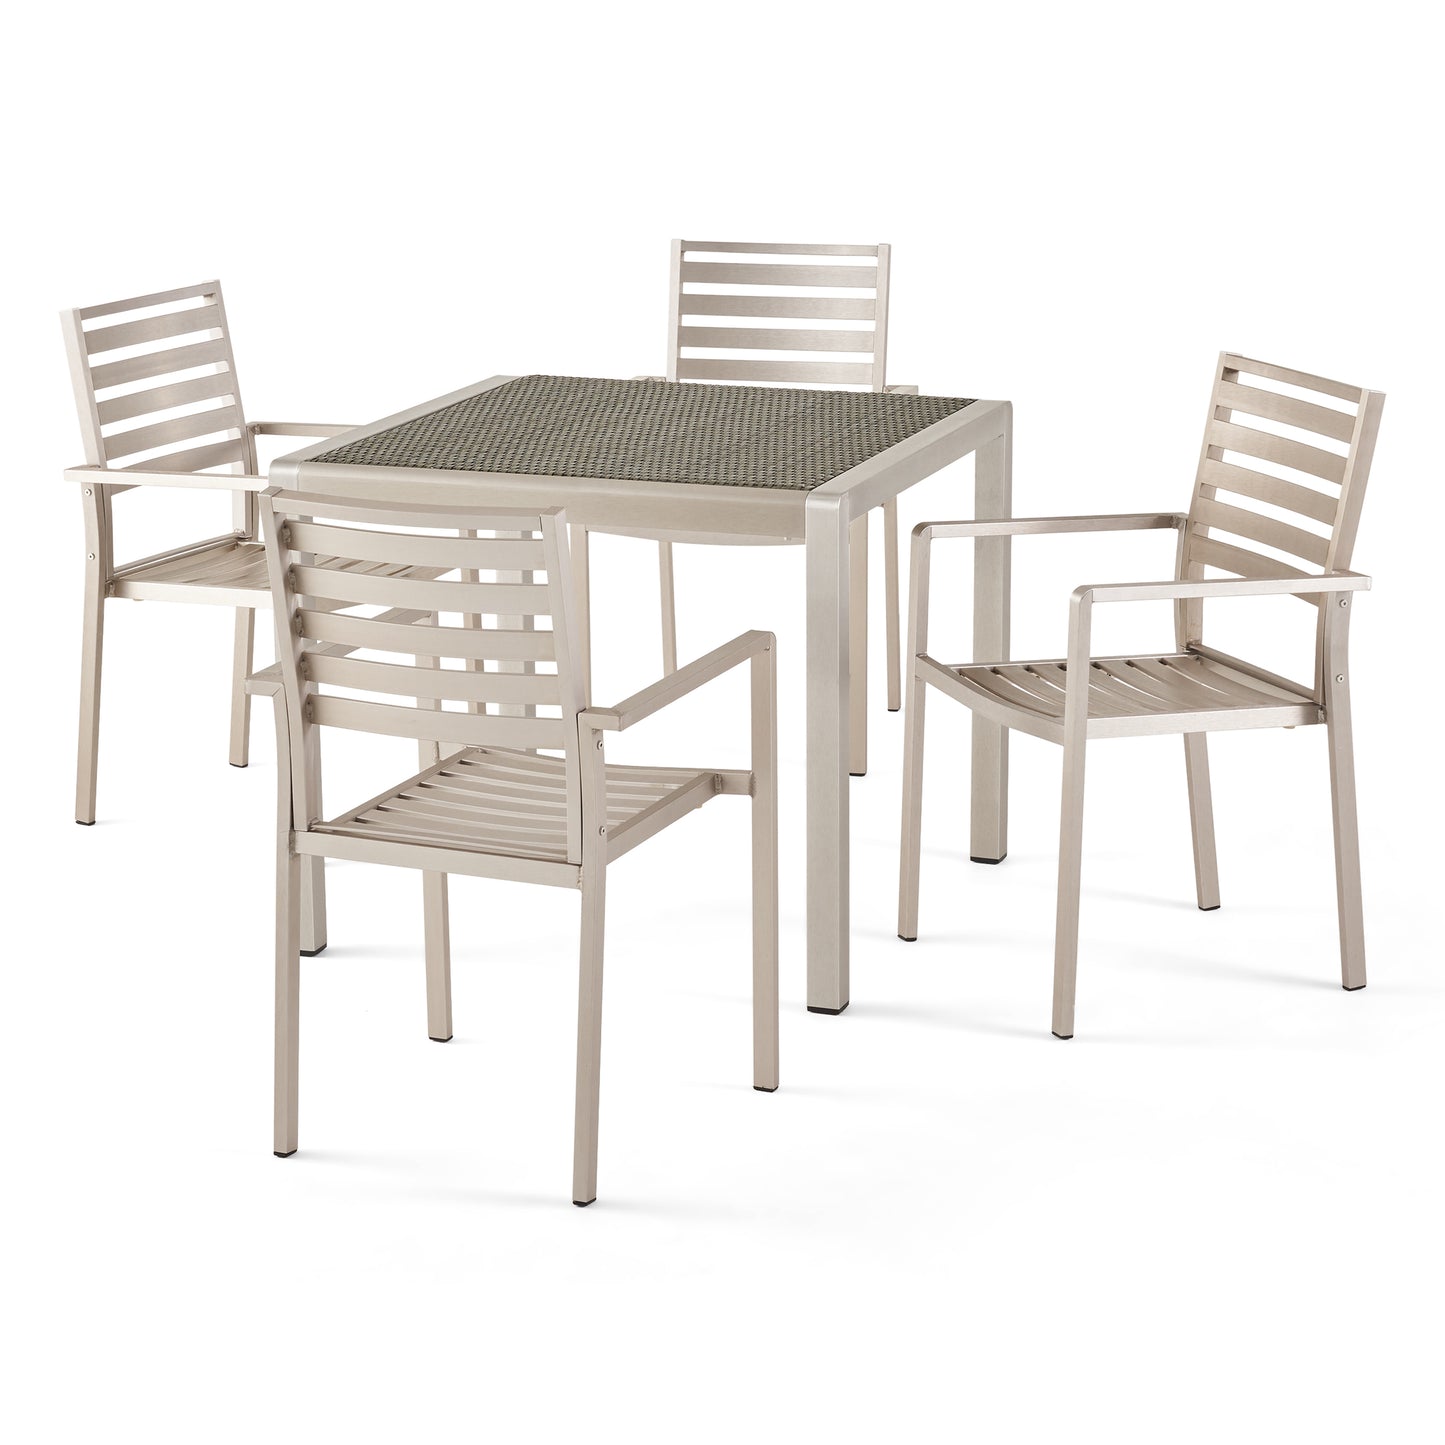 Cherie Outdoor Modern 4 Seater Aluminum Dining Set with Wicker Table Top